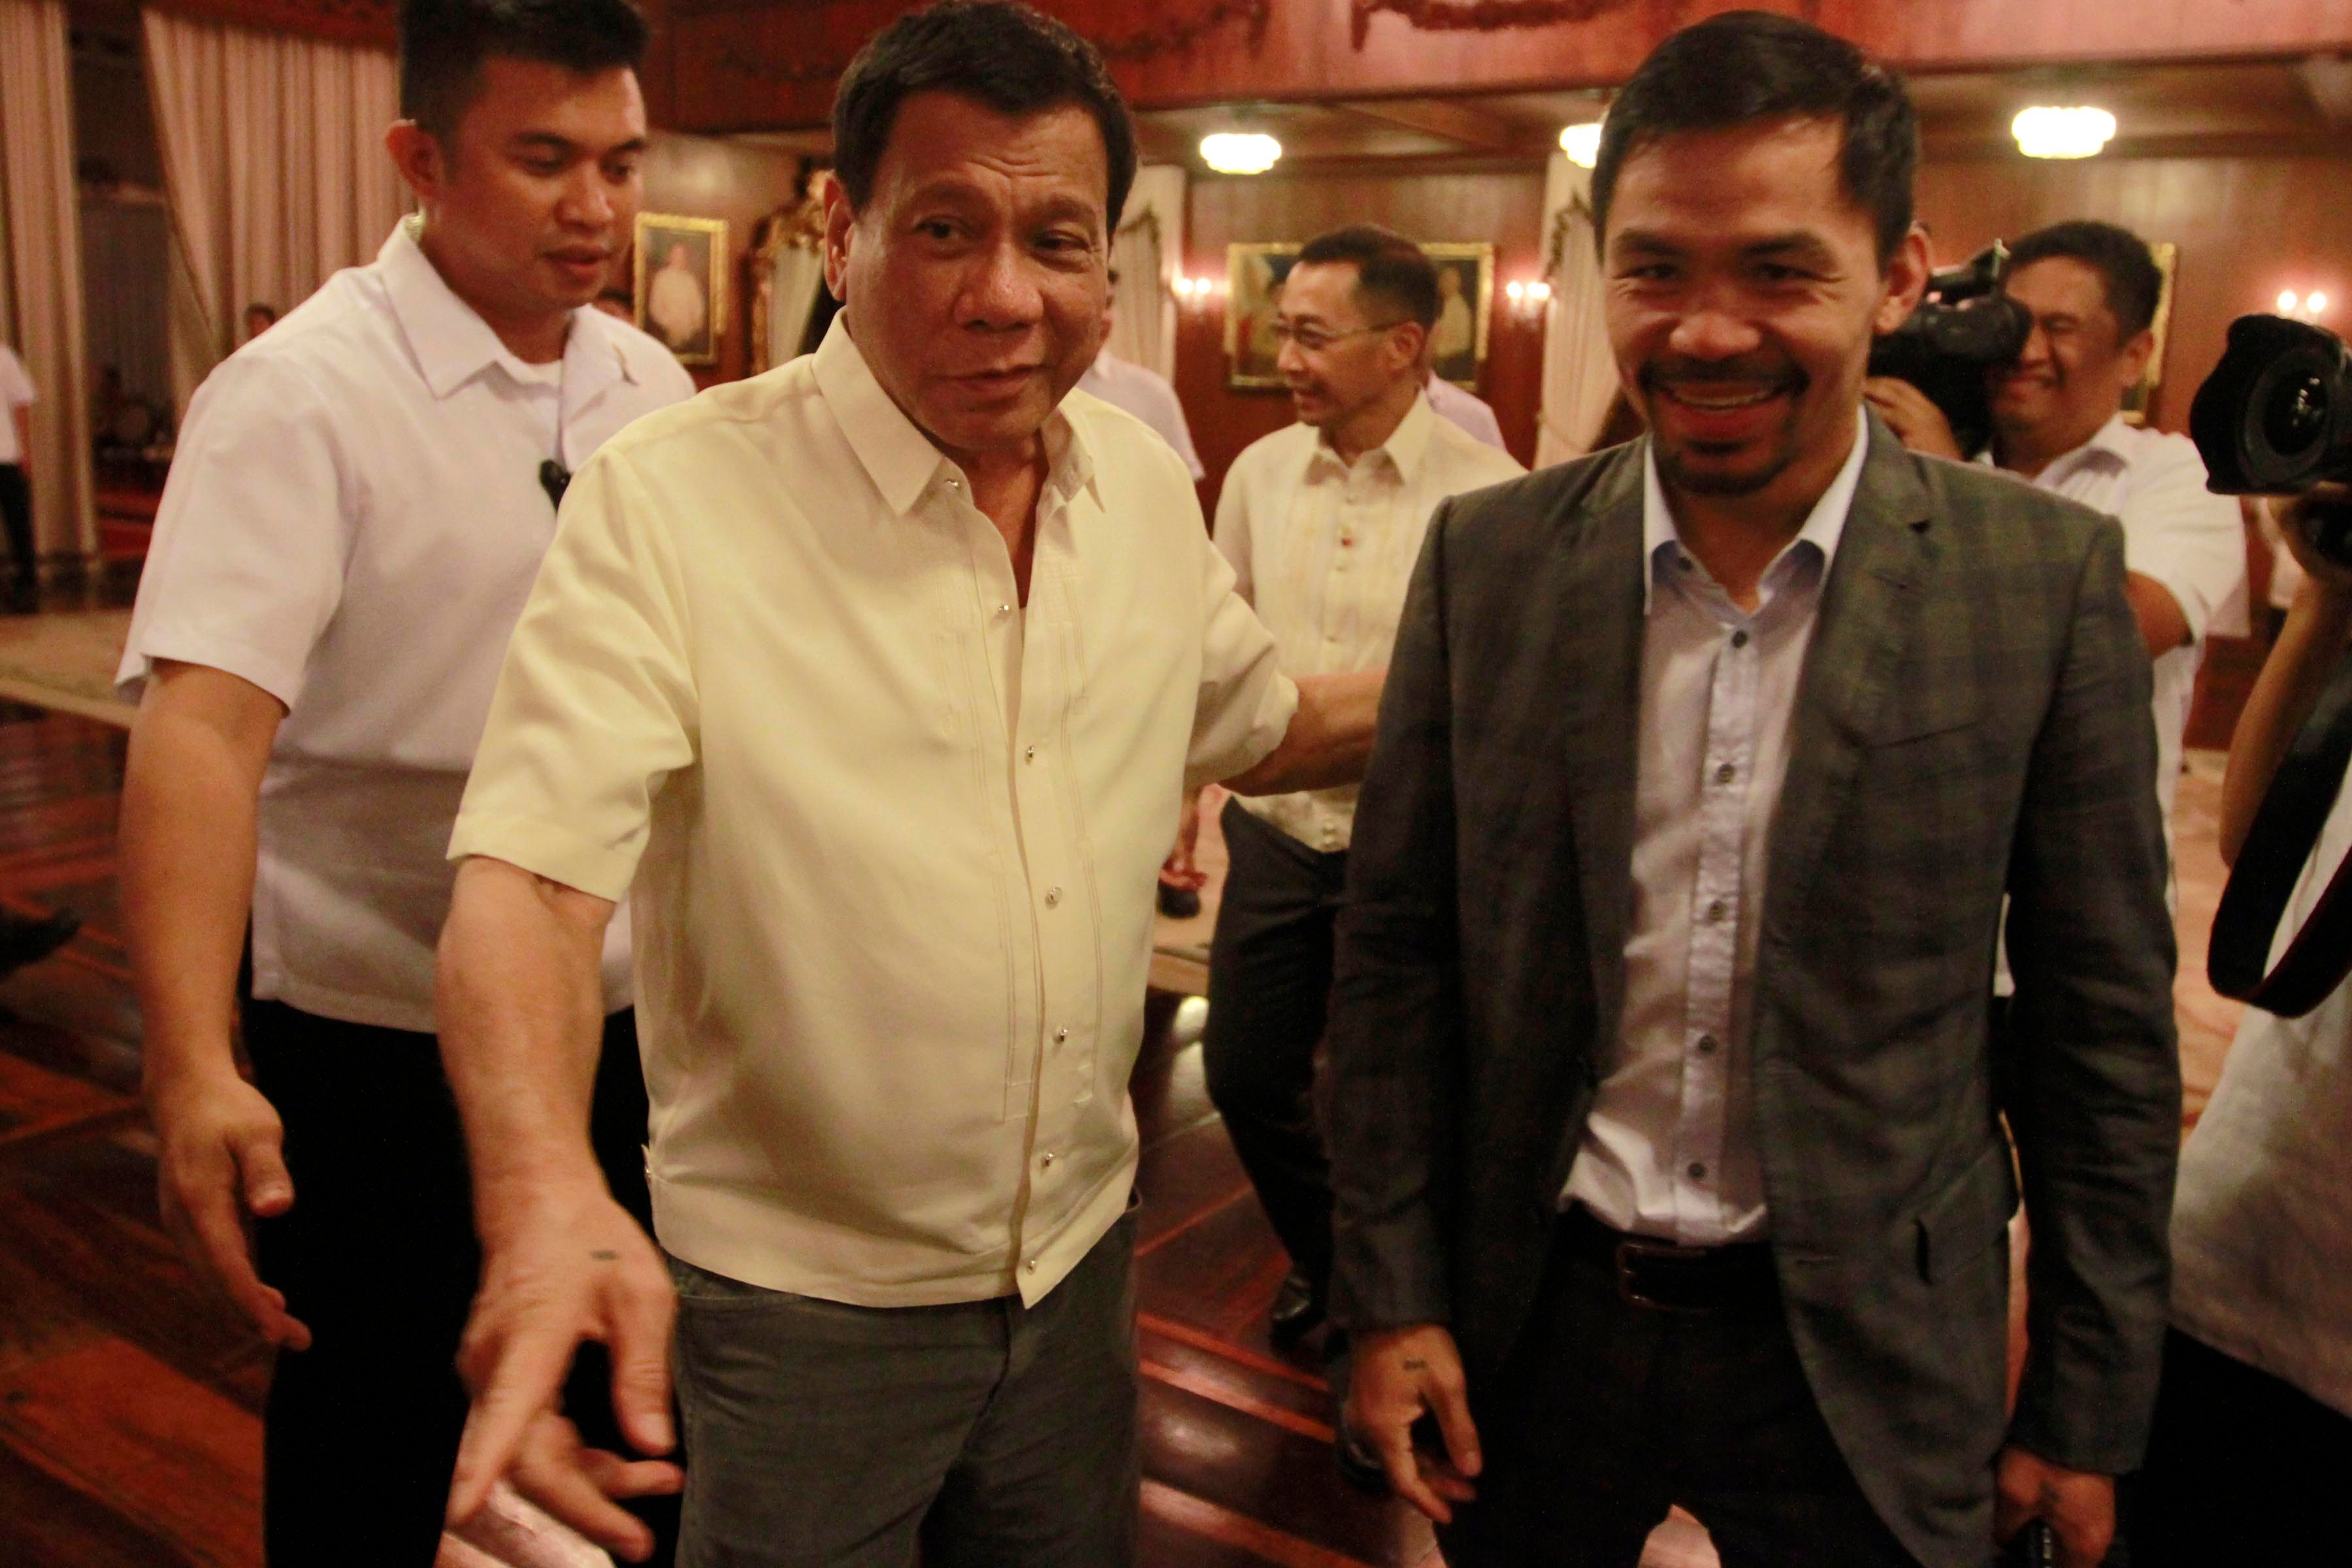 ONE-ON-ONE MEETING. President Rodrigo Duterte leads Senator Manny Pacquiao to the Study Room of Malacañang Palace on August 1, 2016. Photo by Rey Baniquet/PPD 